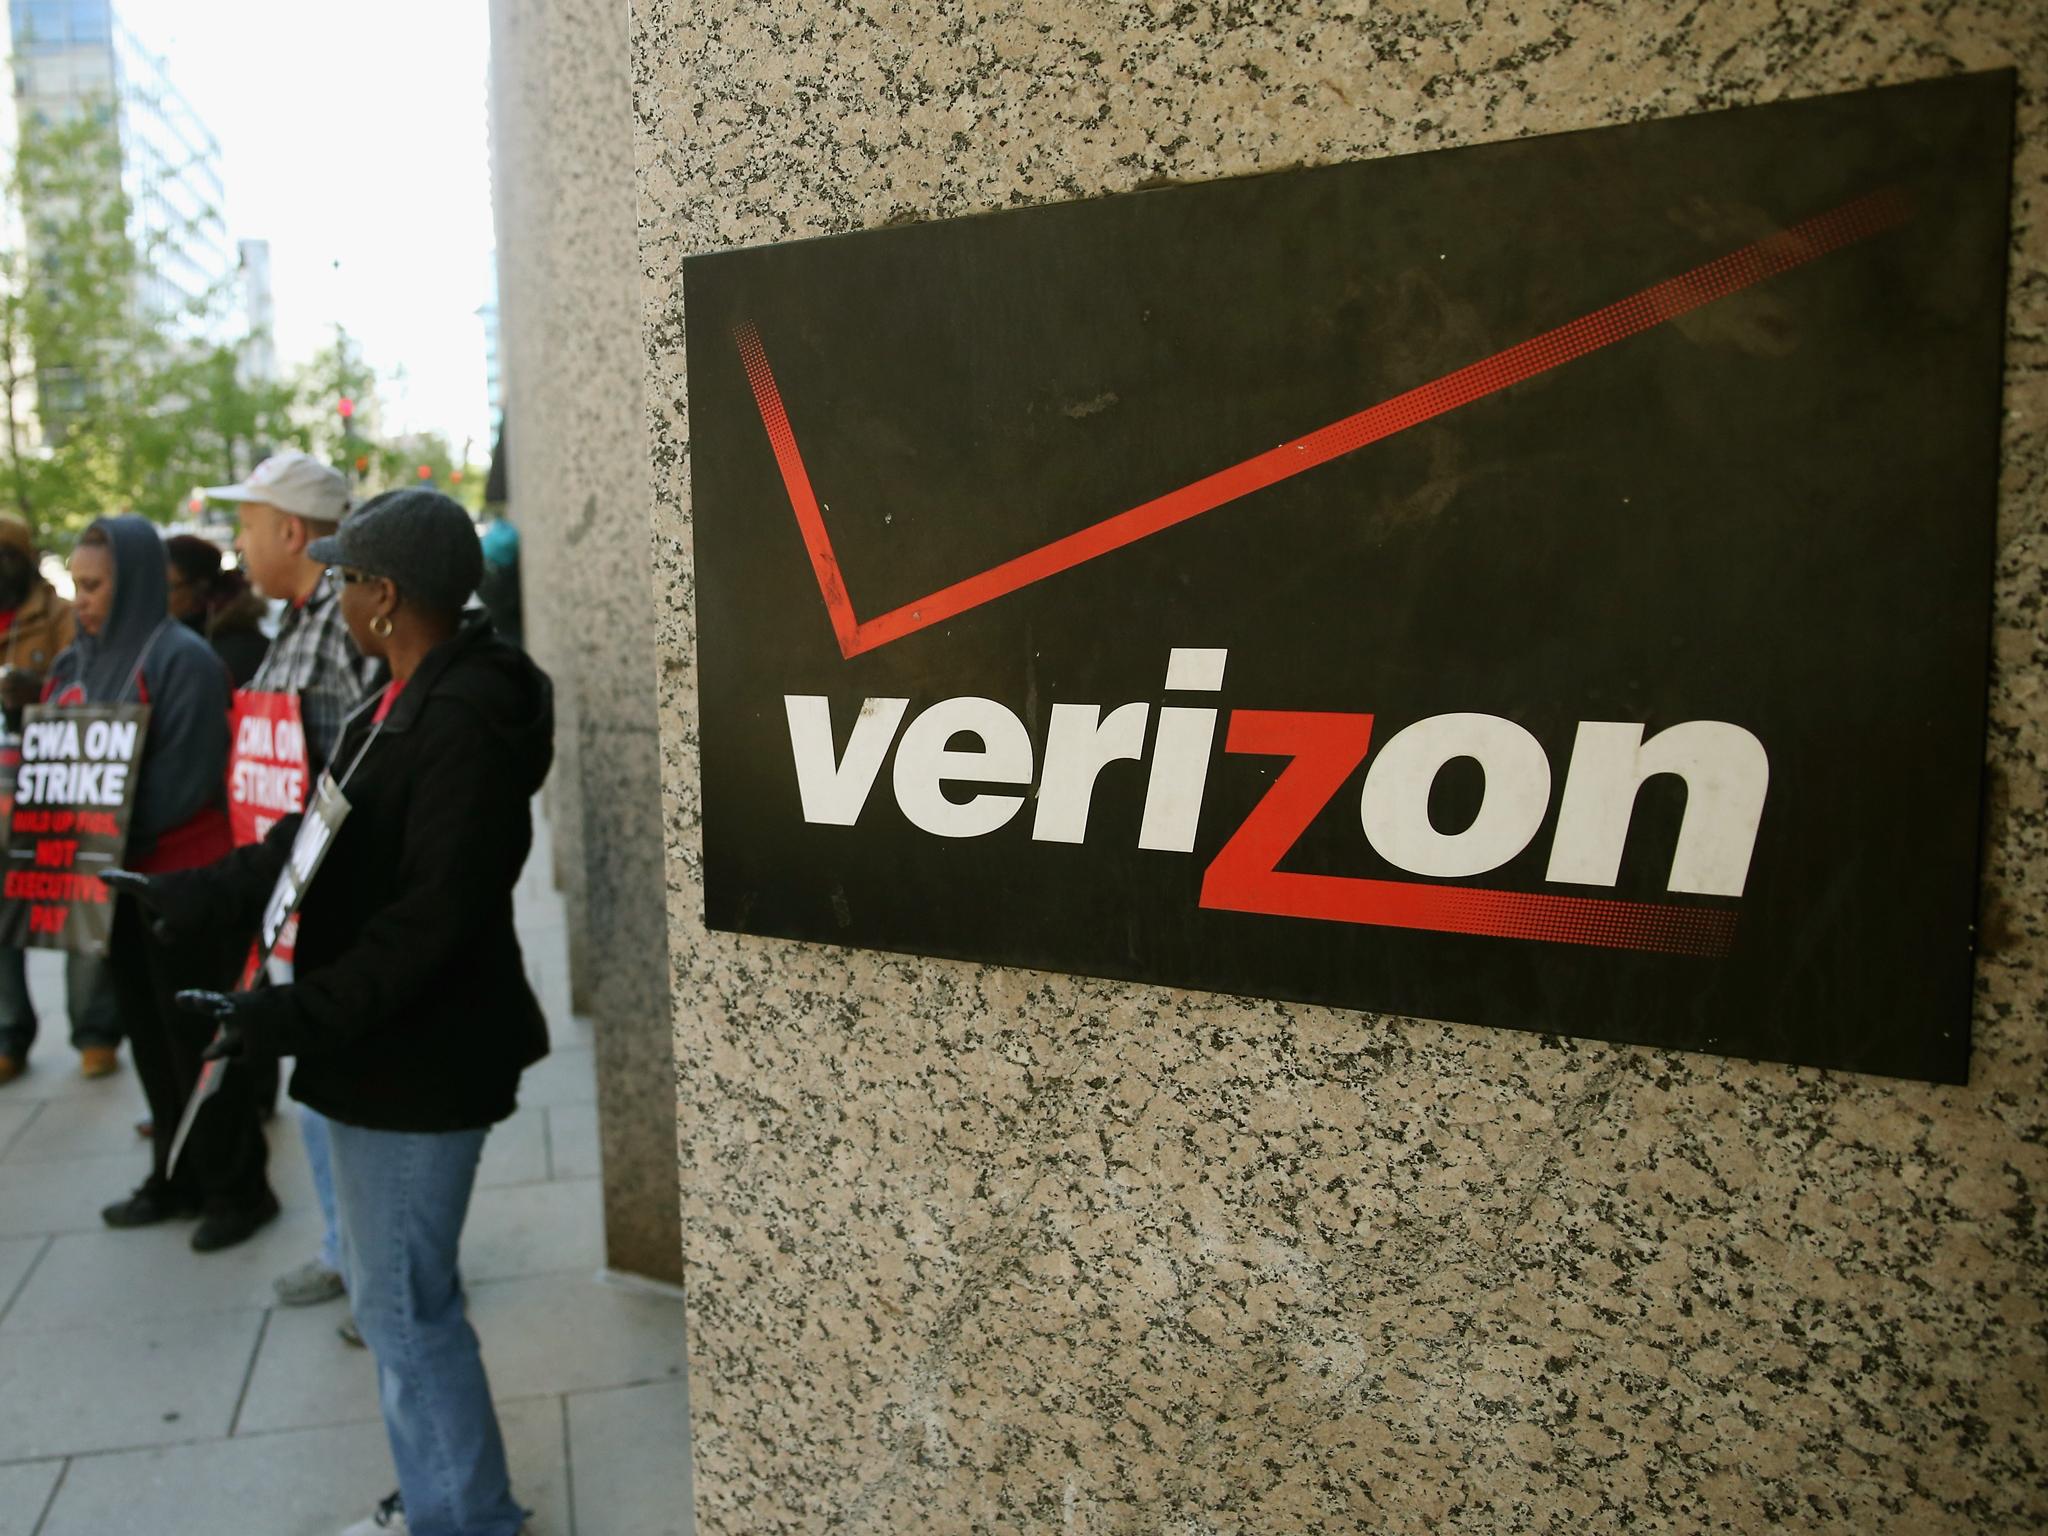 Picketing workers are now the defendants in multiple lawsuits from the telecoms giant